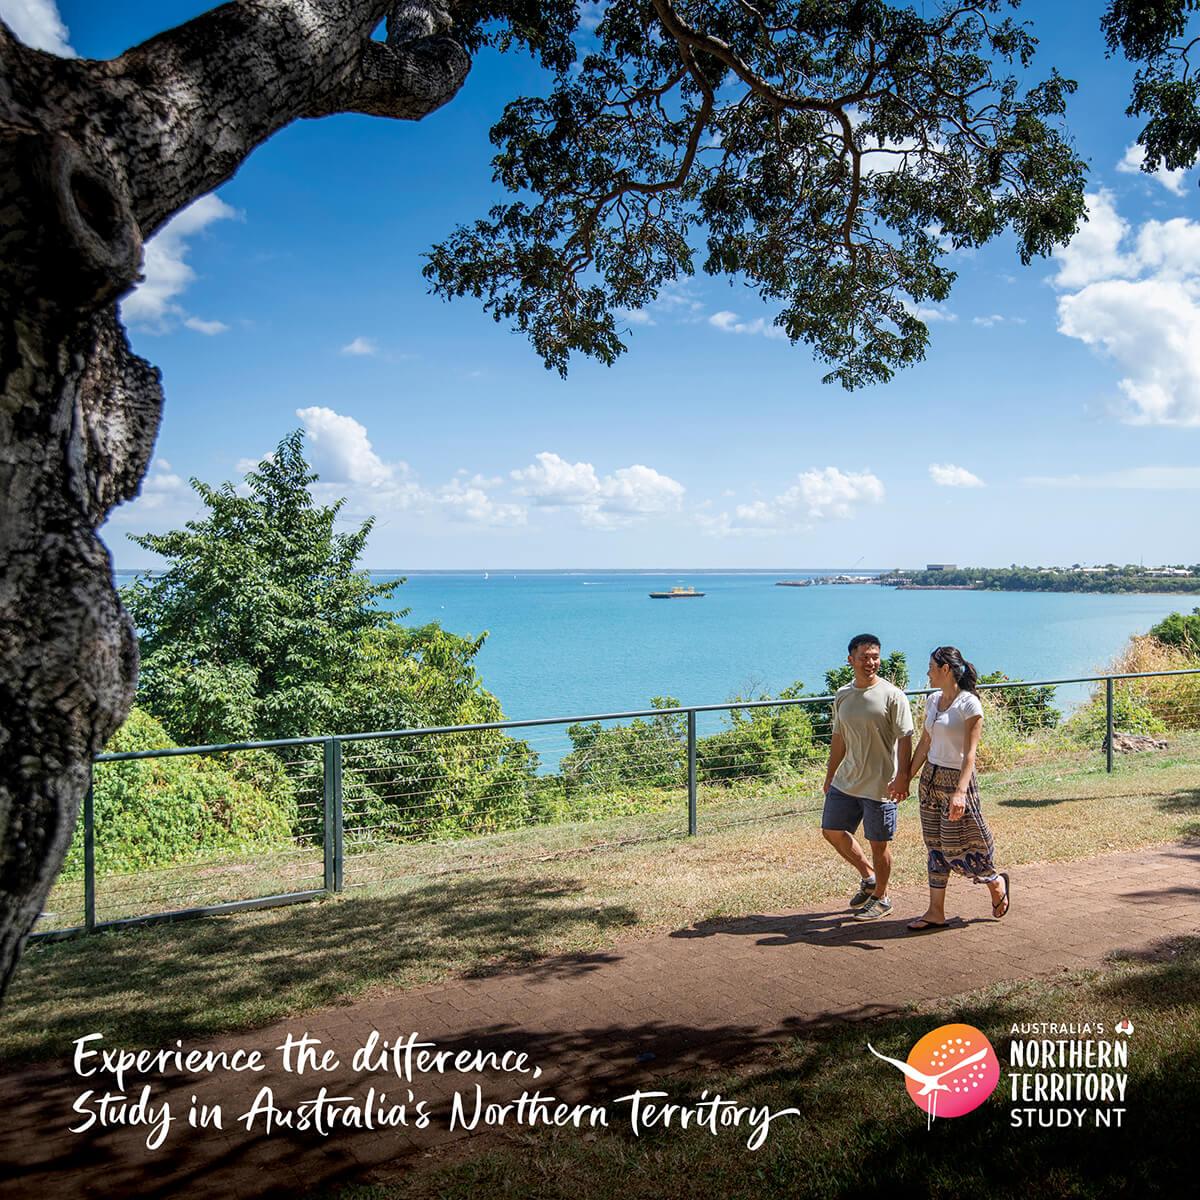 Experience the difference, study in Australia's Northern Territory